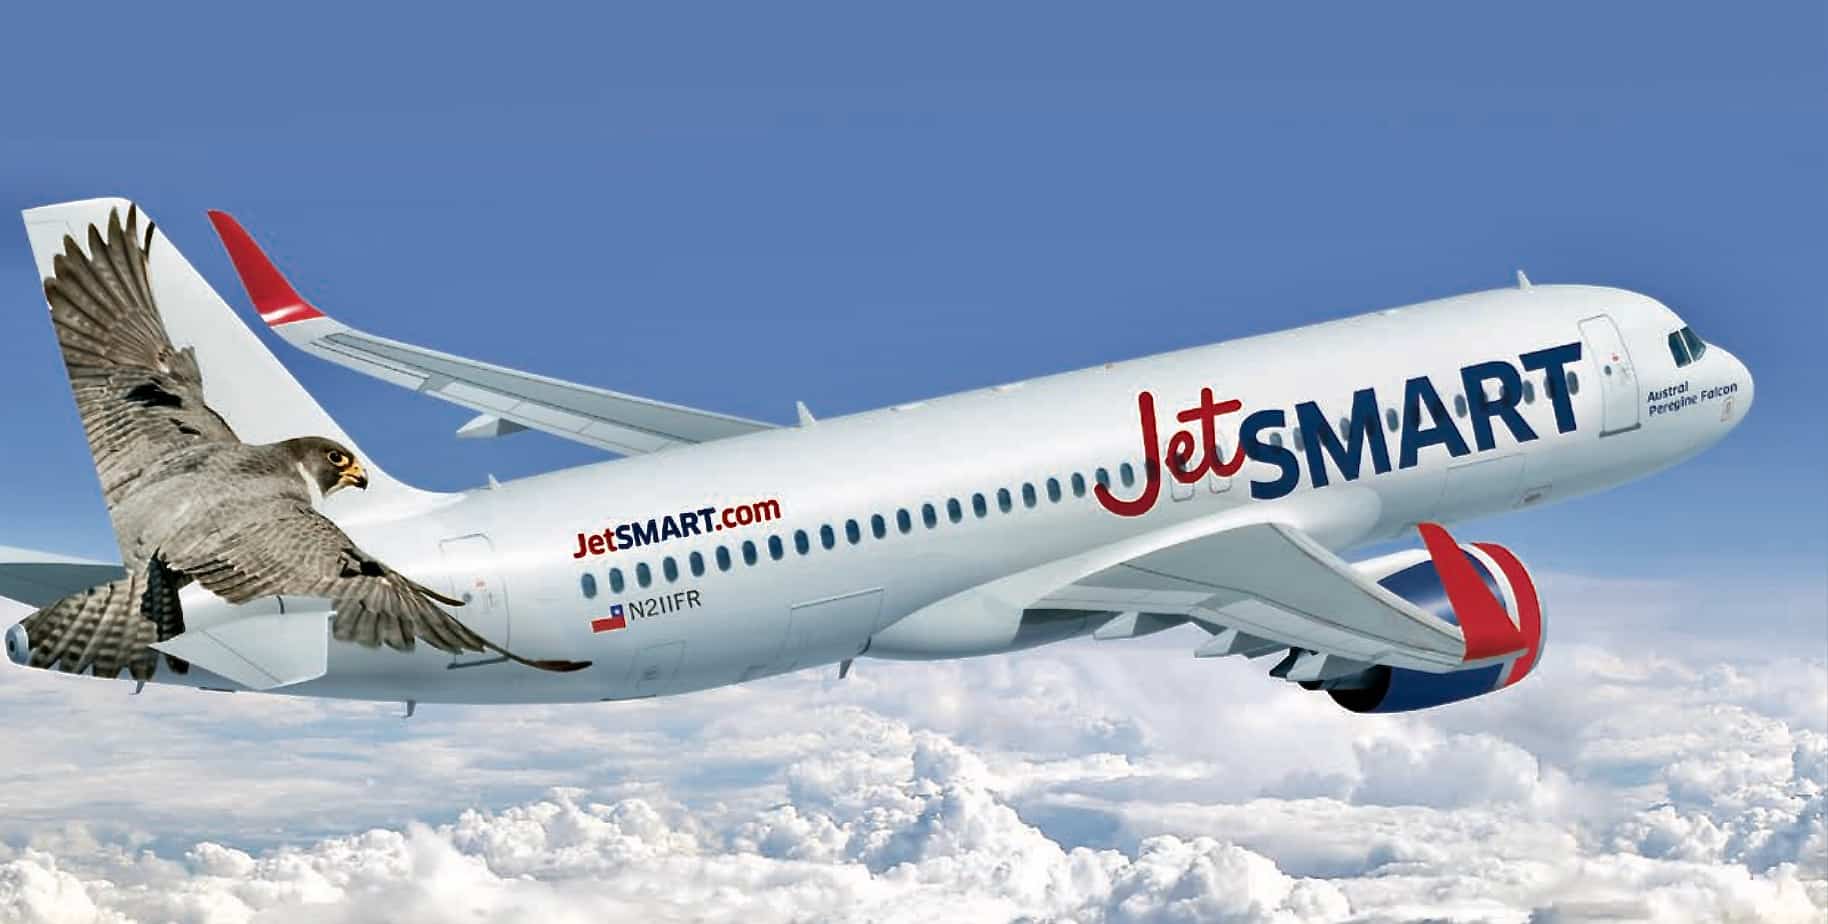 A new route connecting Chile and Brazil has been launched by JetSmart.